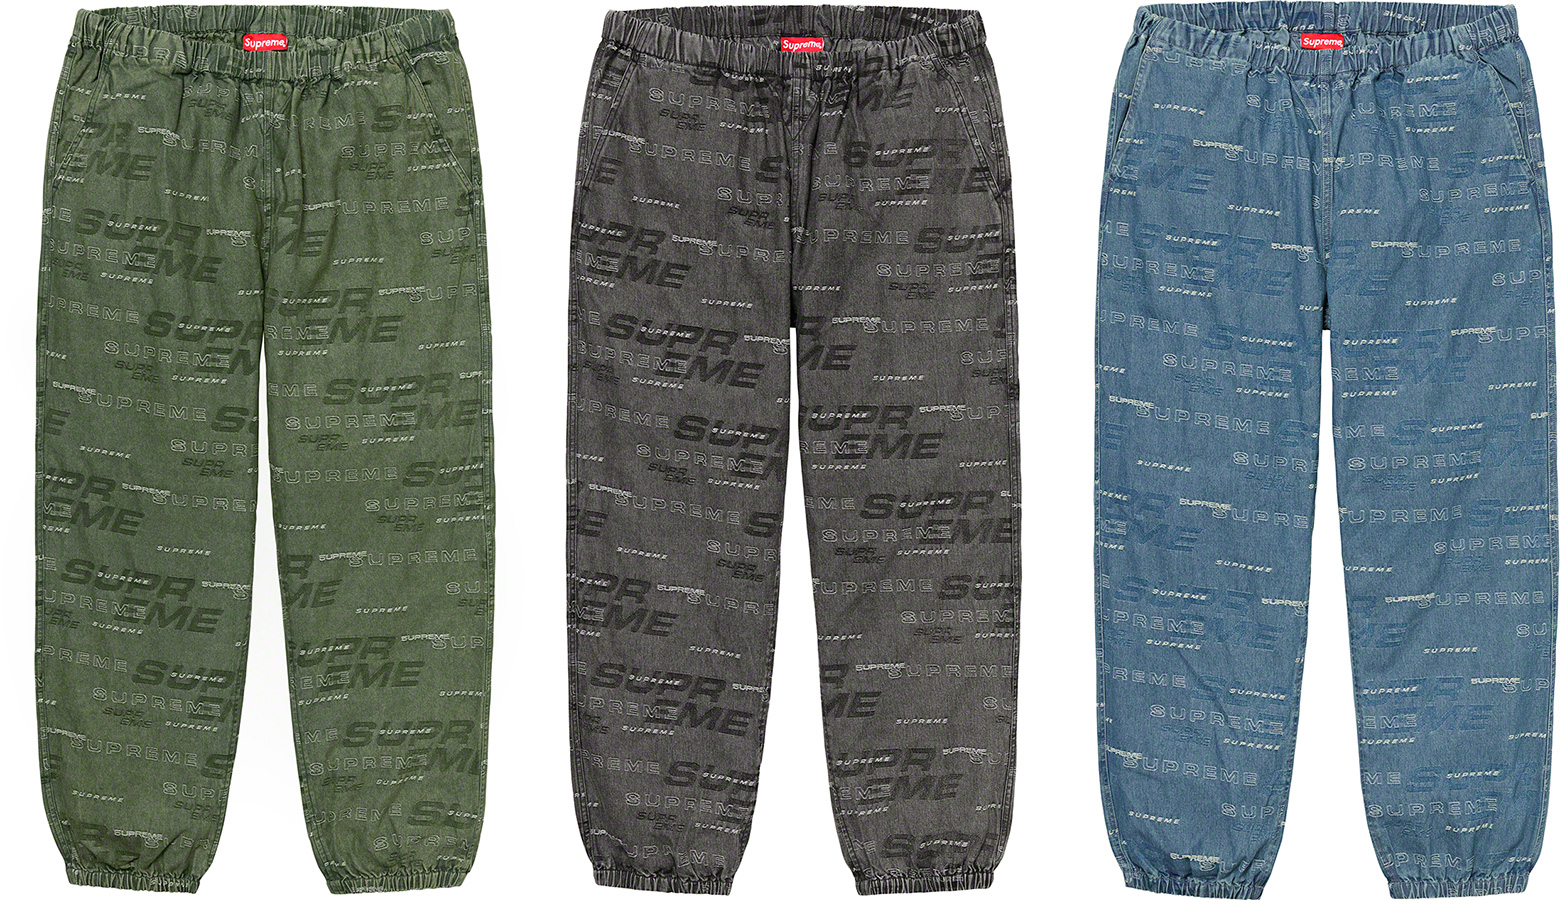 Pants & Jeans from the best skate brands